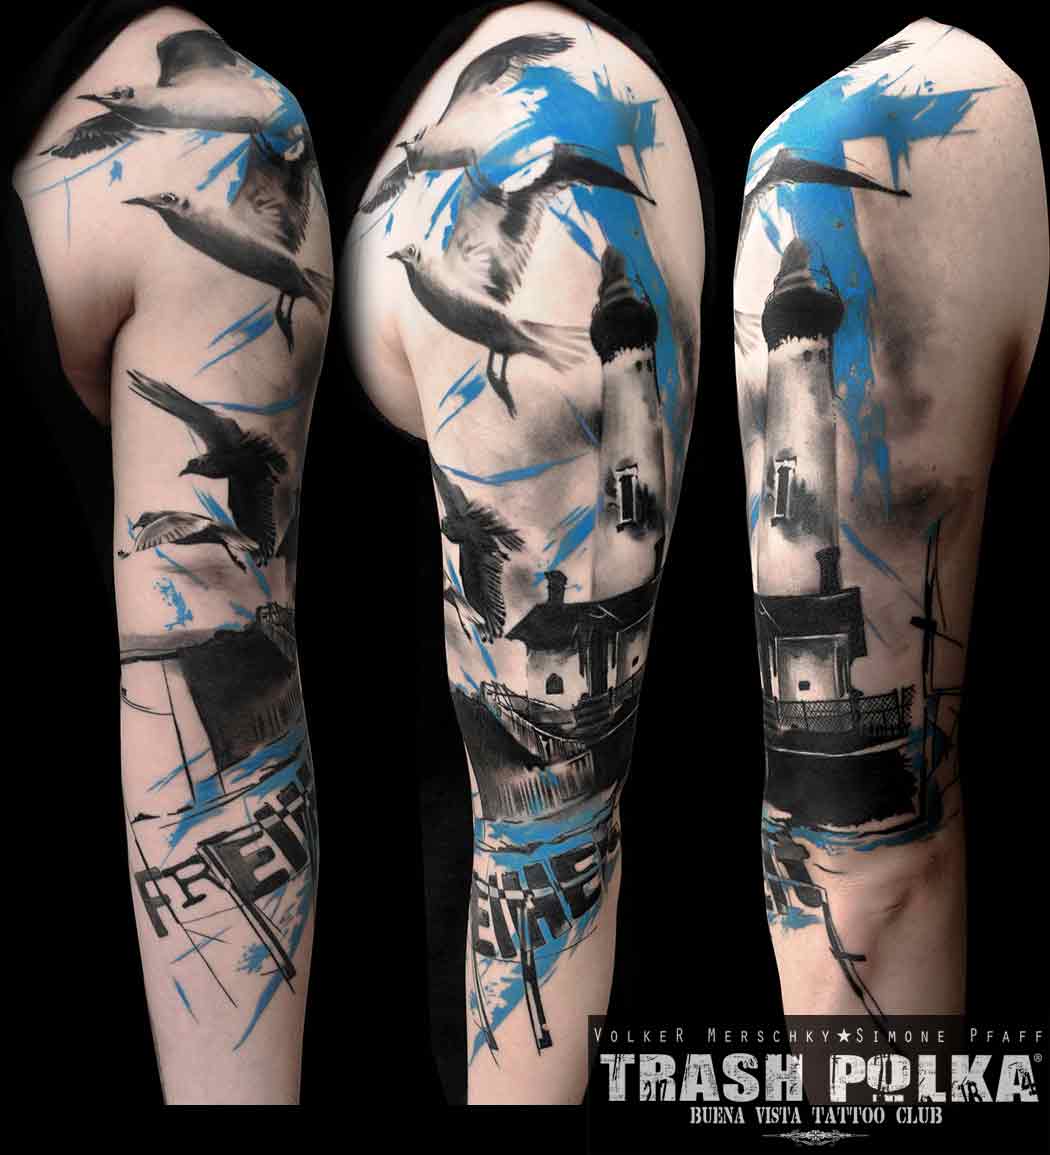 A trash polka arm tattoo shows a lighthouse with seagulls and the word freedom and cross in blue ink